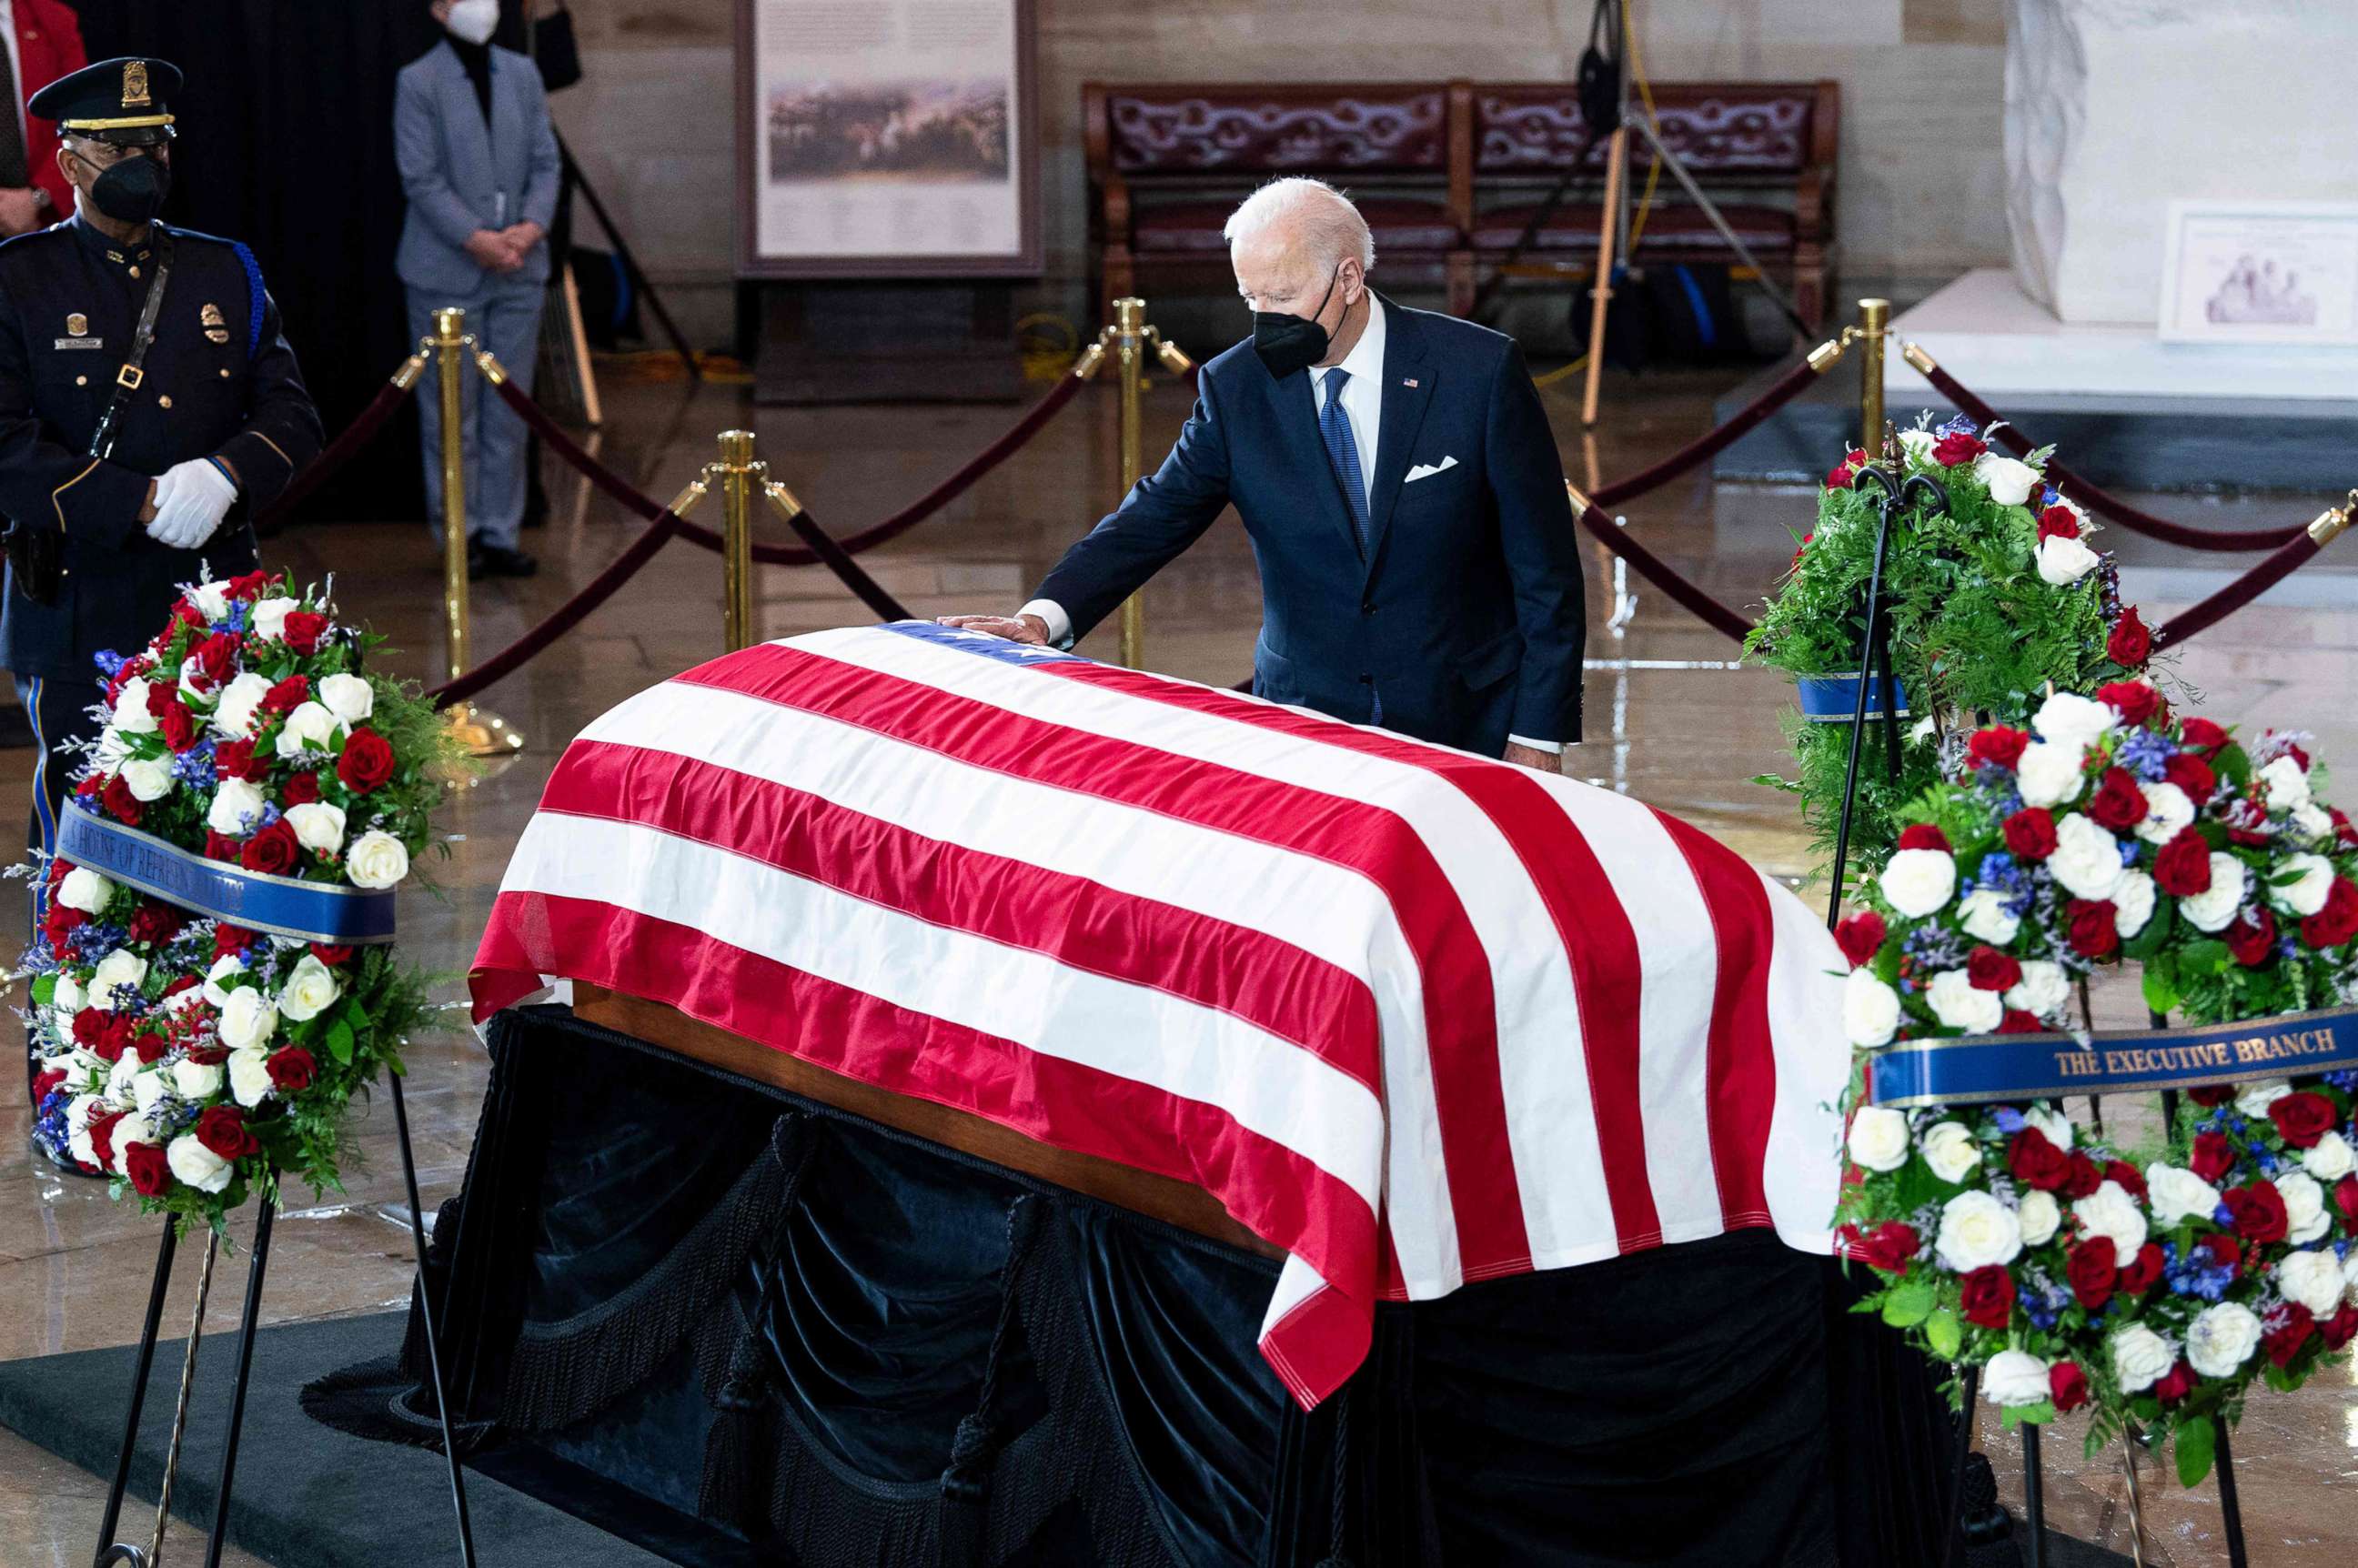 PHOTO: President Joe Biden touches the flag-draped casket former Senate Majority Leader Harry Reid as he pays his respects during a Congressional ceremony as Reid lies in state at the U.S. Capitol in Washington, Jan. 12, 2022.